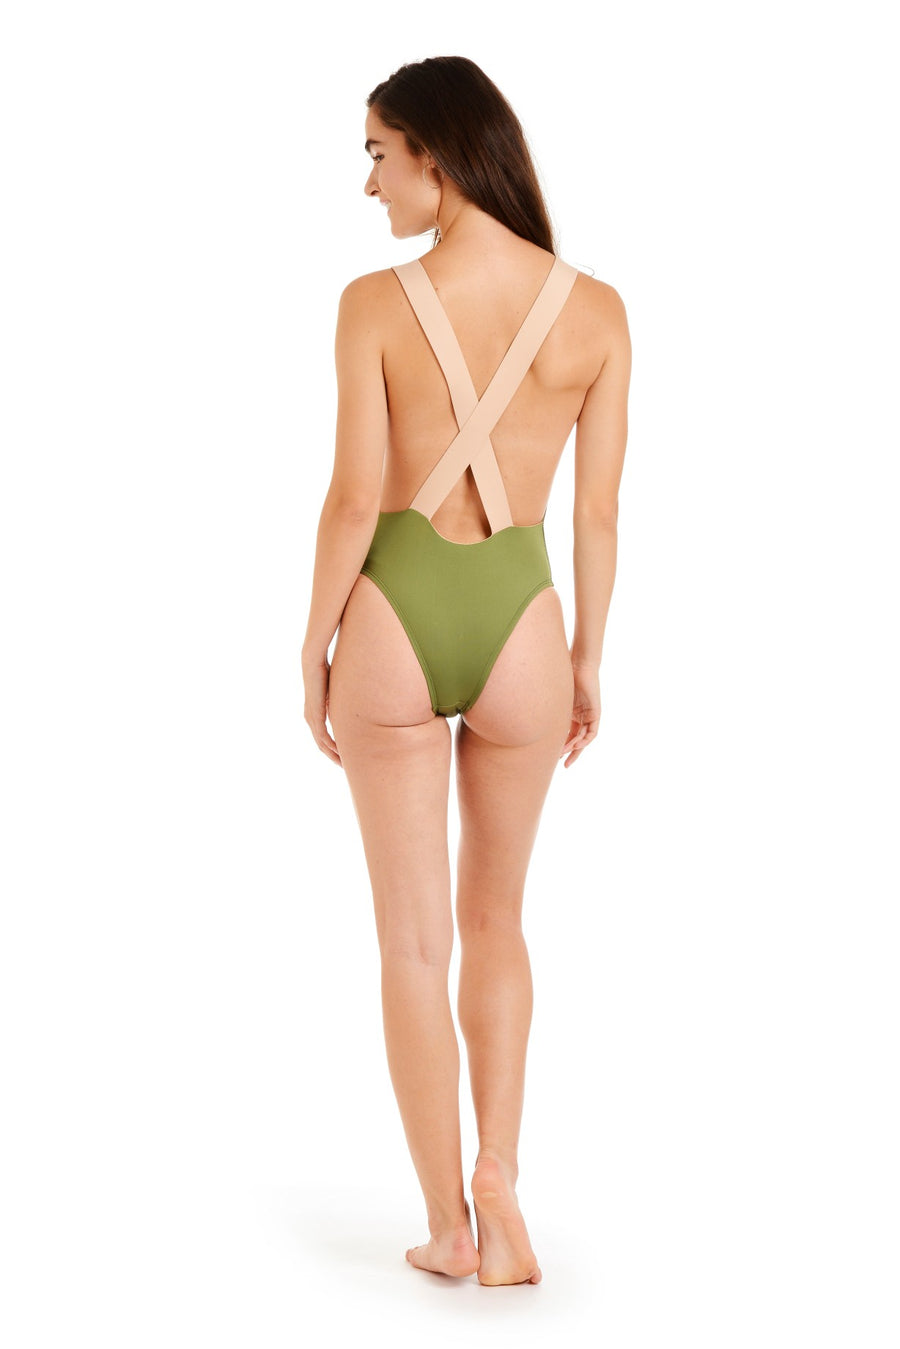 Back view of a woman wearing an olive one piece swimsuit